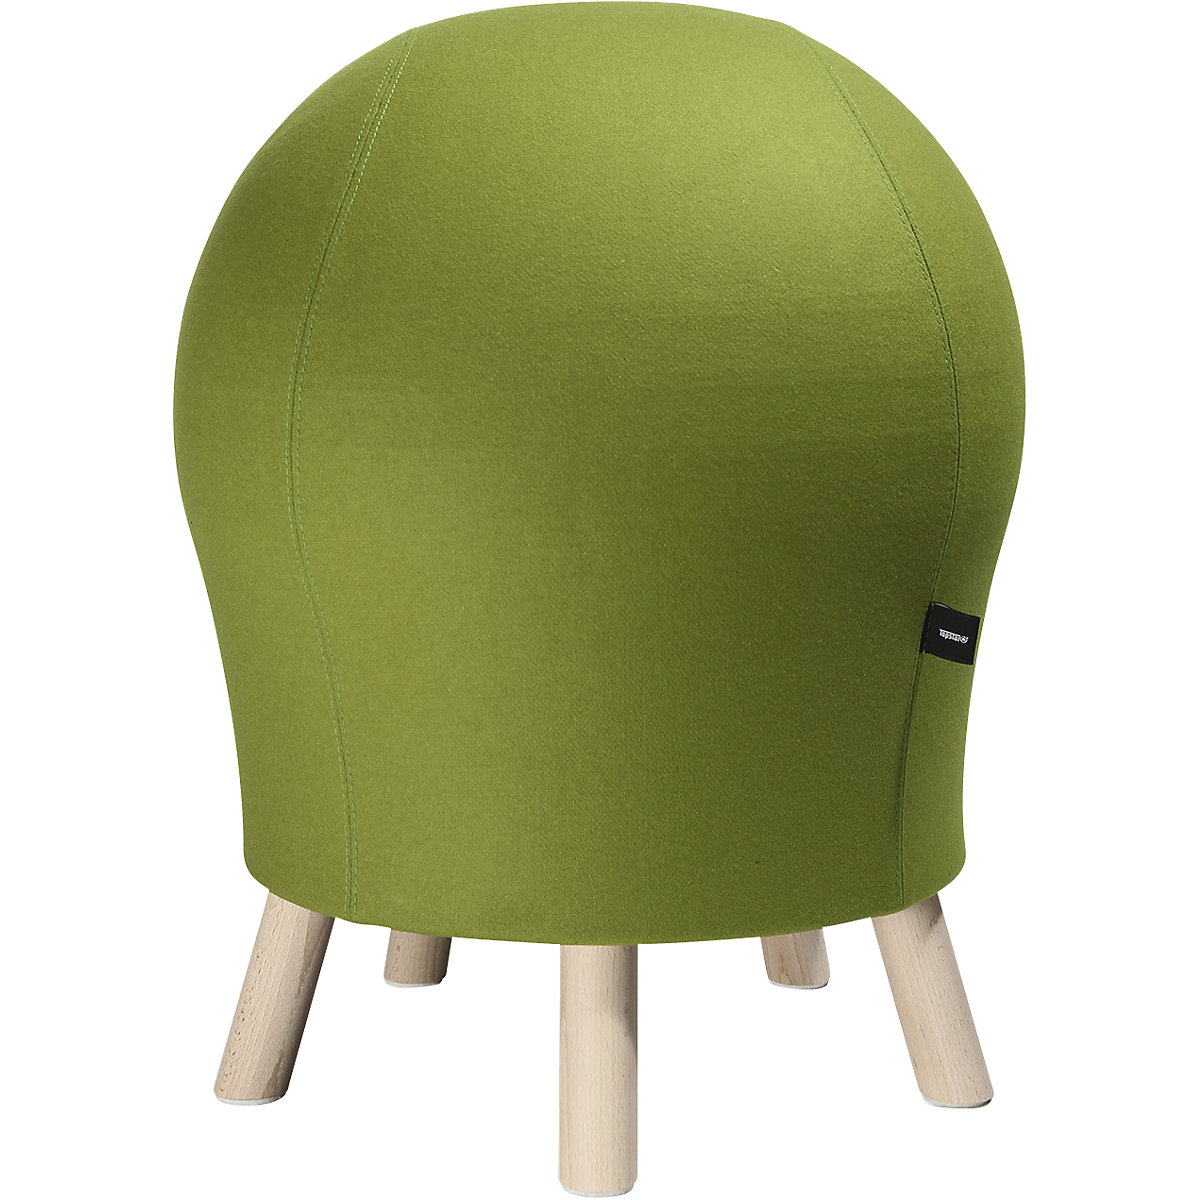 SITNESS 5 ALPINE fitness stool – Topstar, seat height approx. 620 mm, green cover-3